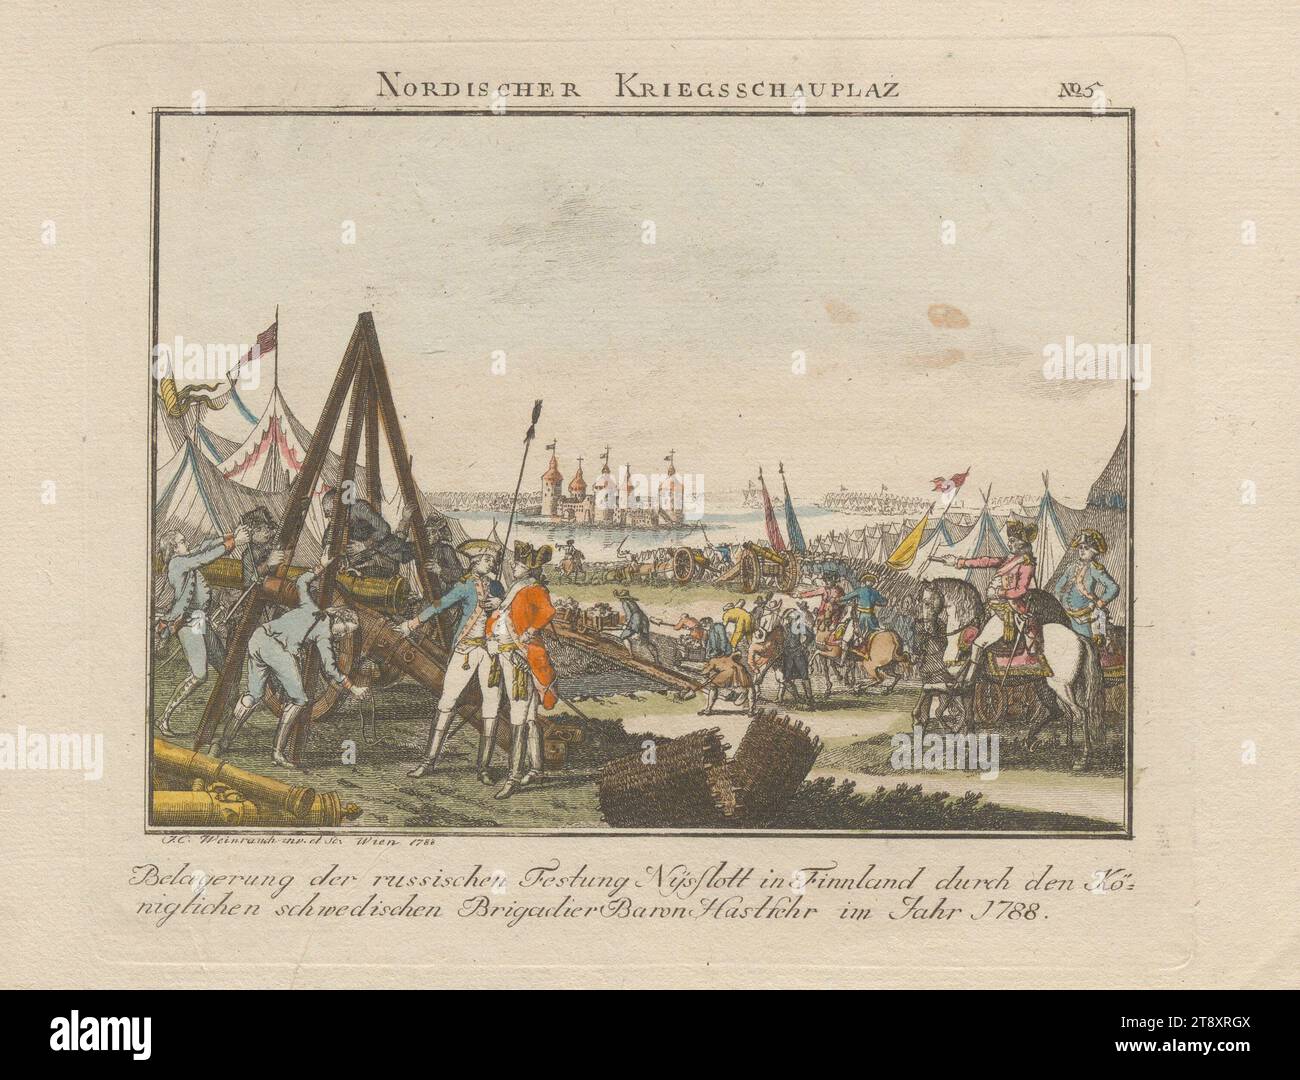 No. 5 of the series 'Nordic Theater of War': siege of the Russian fortress Nysflott in Finland, Johann Caspar Weinrauch (1765-1846), engraver, 1788, paper, colored, copperplate engraving, height 19, 3 cm, width 24, 4 cm, plate size 16×18, 9 cm, war and warfare, fine arts, military, battle, battle in general, the soldier; the soldier's life, siege, firearms: Cannon, man, The Vienna Collection Stock Photo